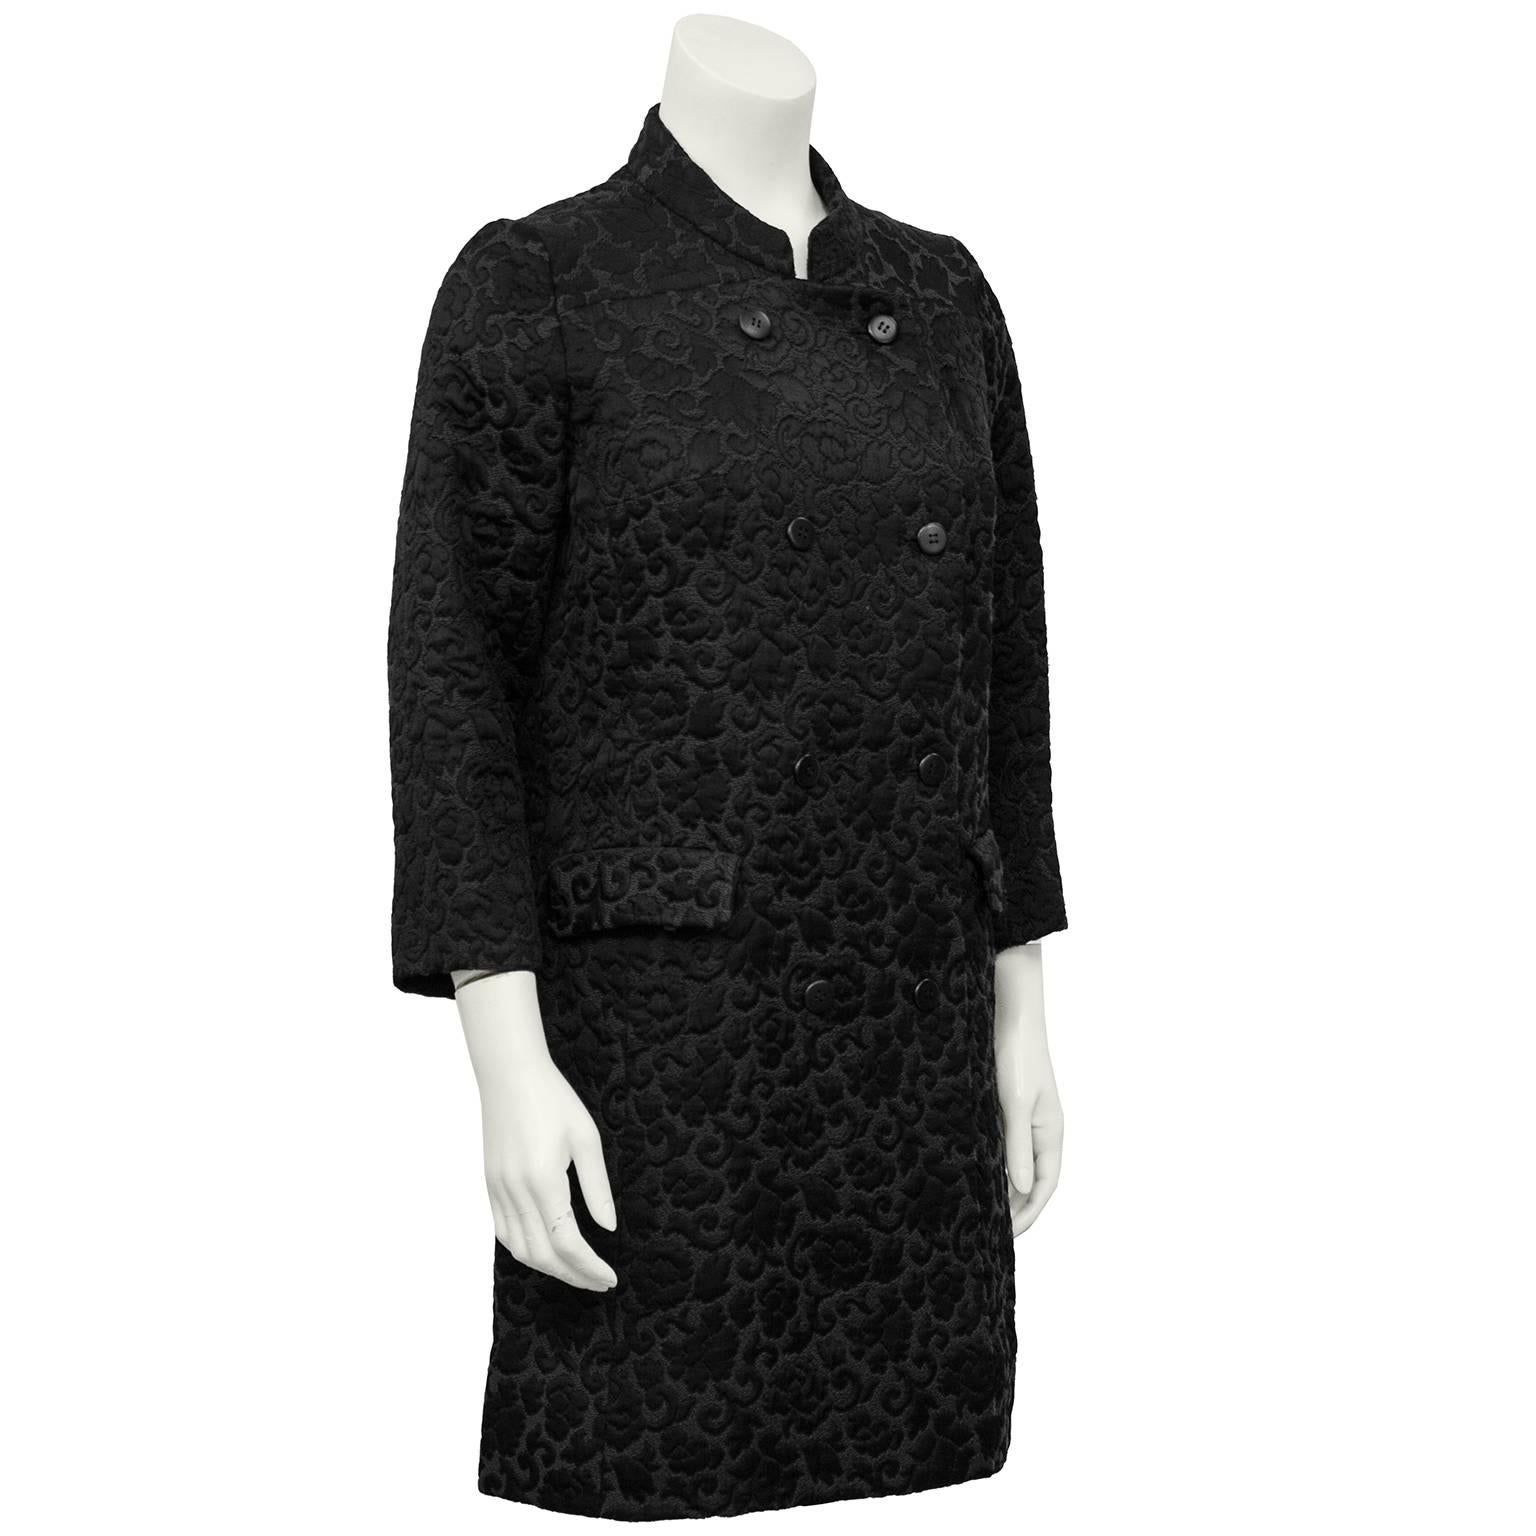 Beautiful 1970s black on black brocade coat by Tiktiner. Mandarin collar, 3/4 length sleeves and flap pockets. Belt detail at back. The perfect seasonal transition coat. Also easily dressed up as an evening coat. Excellent vintage condition, fits